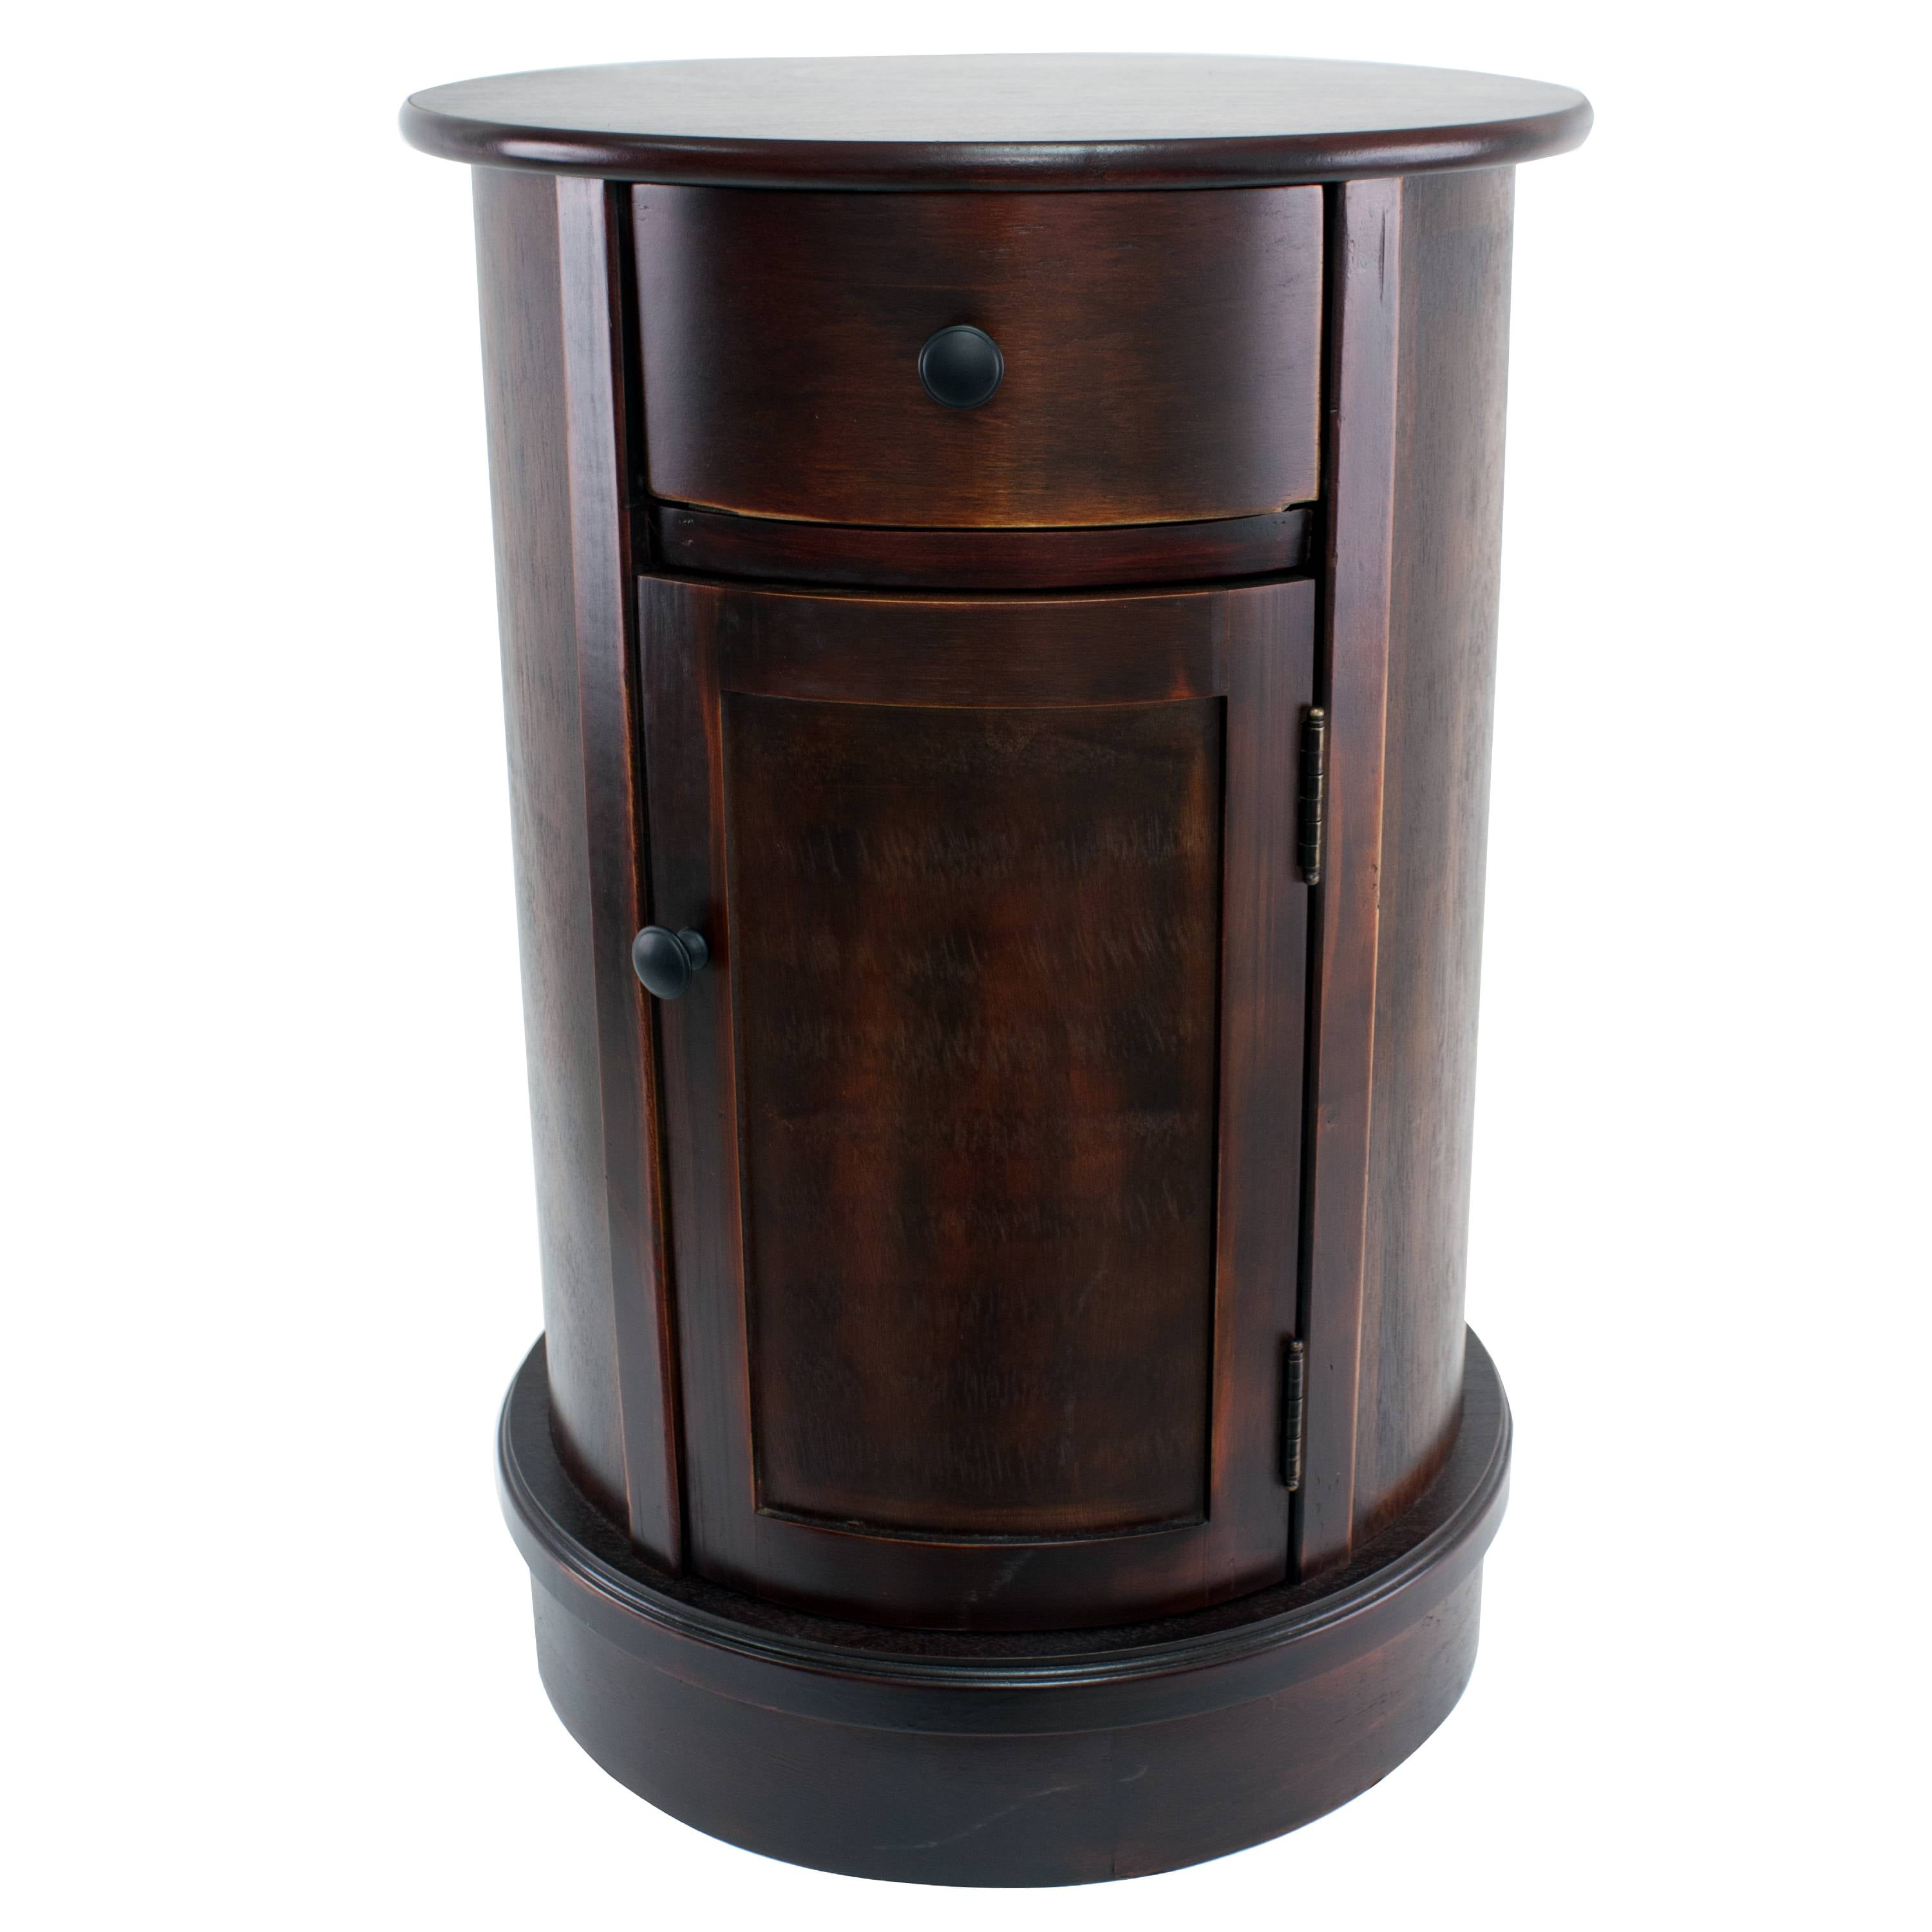 Decor Therapy Keaton Round Storage Side, Round Bedside Table With Storage